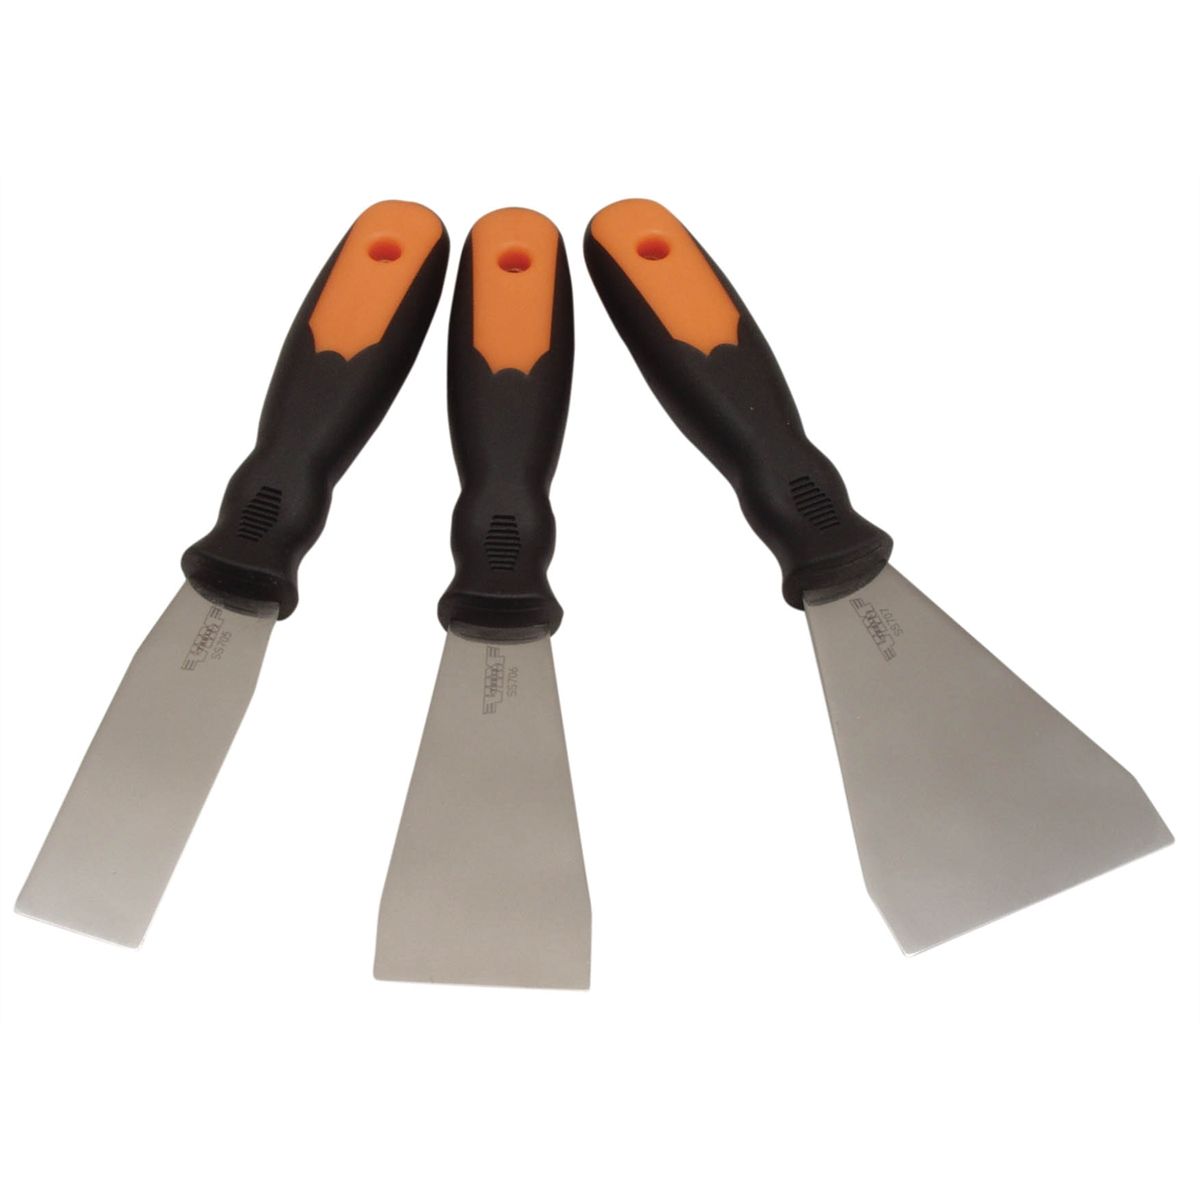 Stainless Steel Flexible Putty Knife Set - 3-Pc